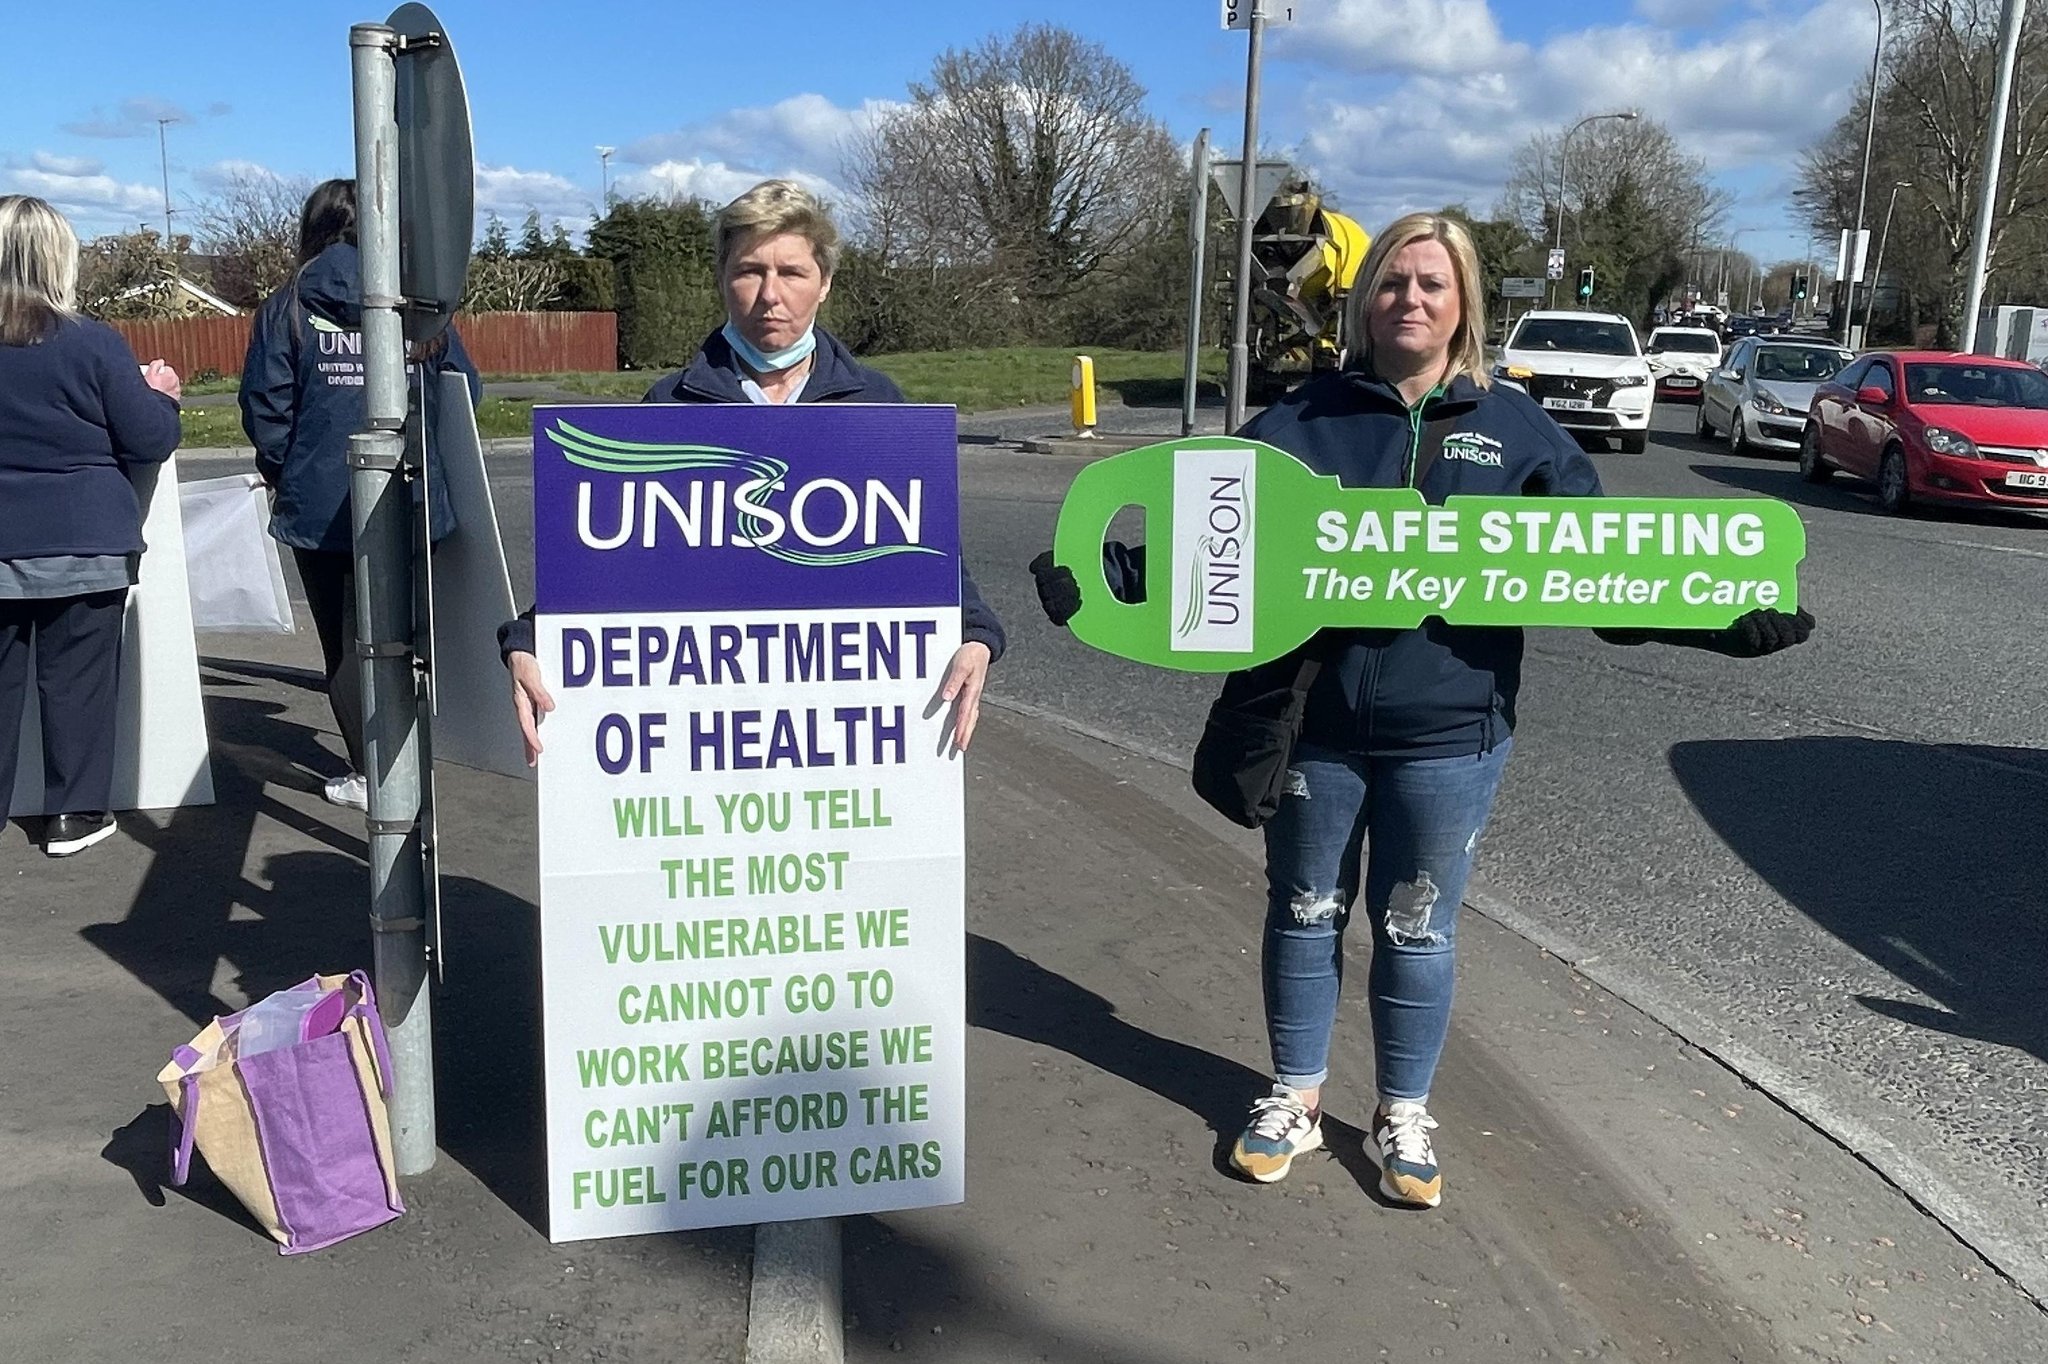 Cost-of-living crisis: Teachers and healthcare workers in call for better pay